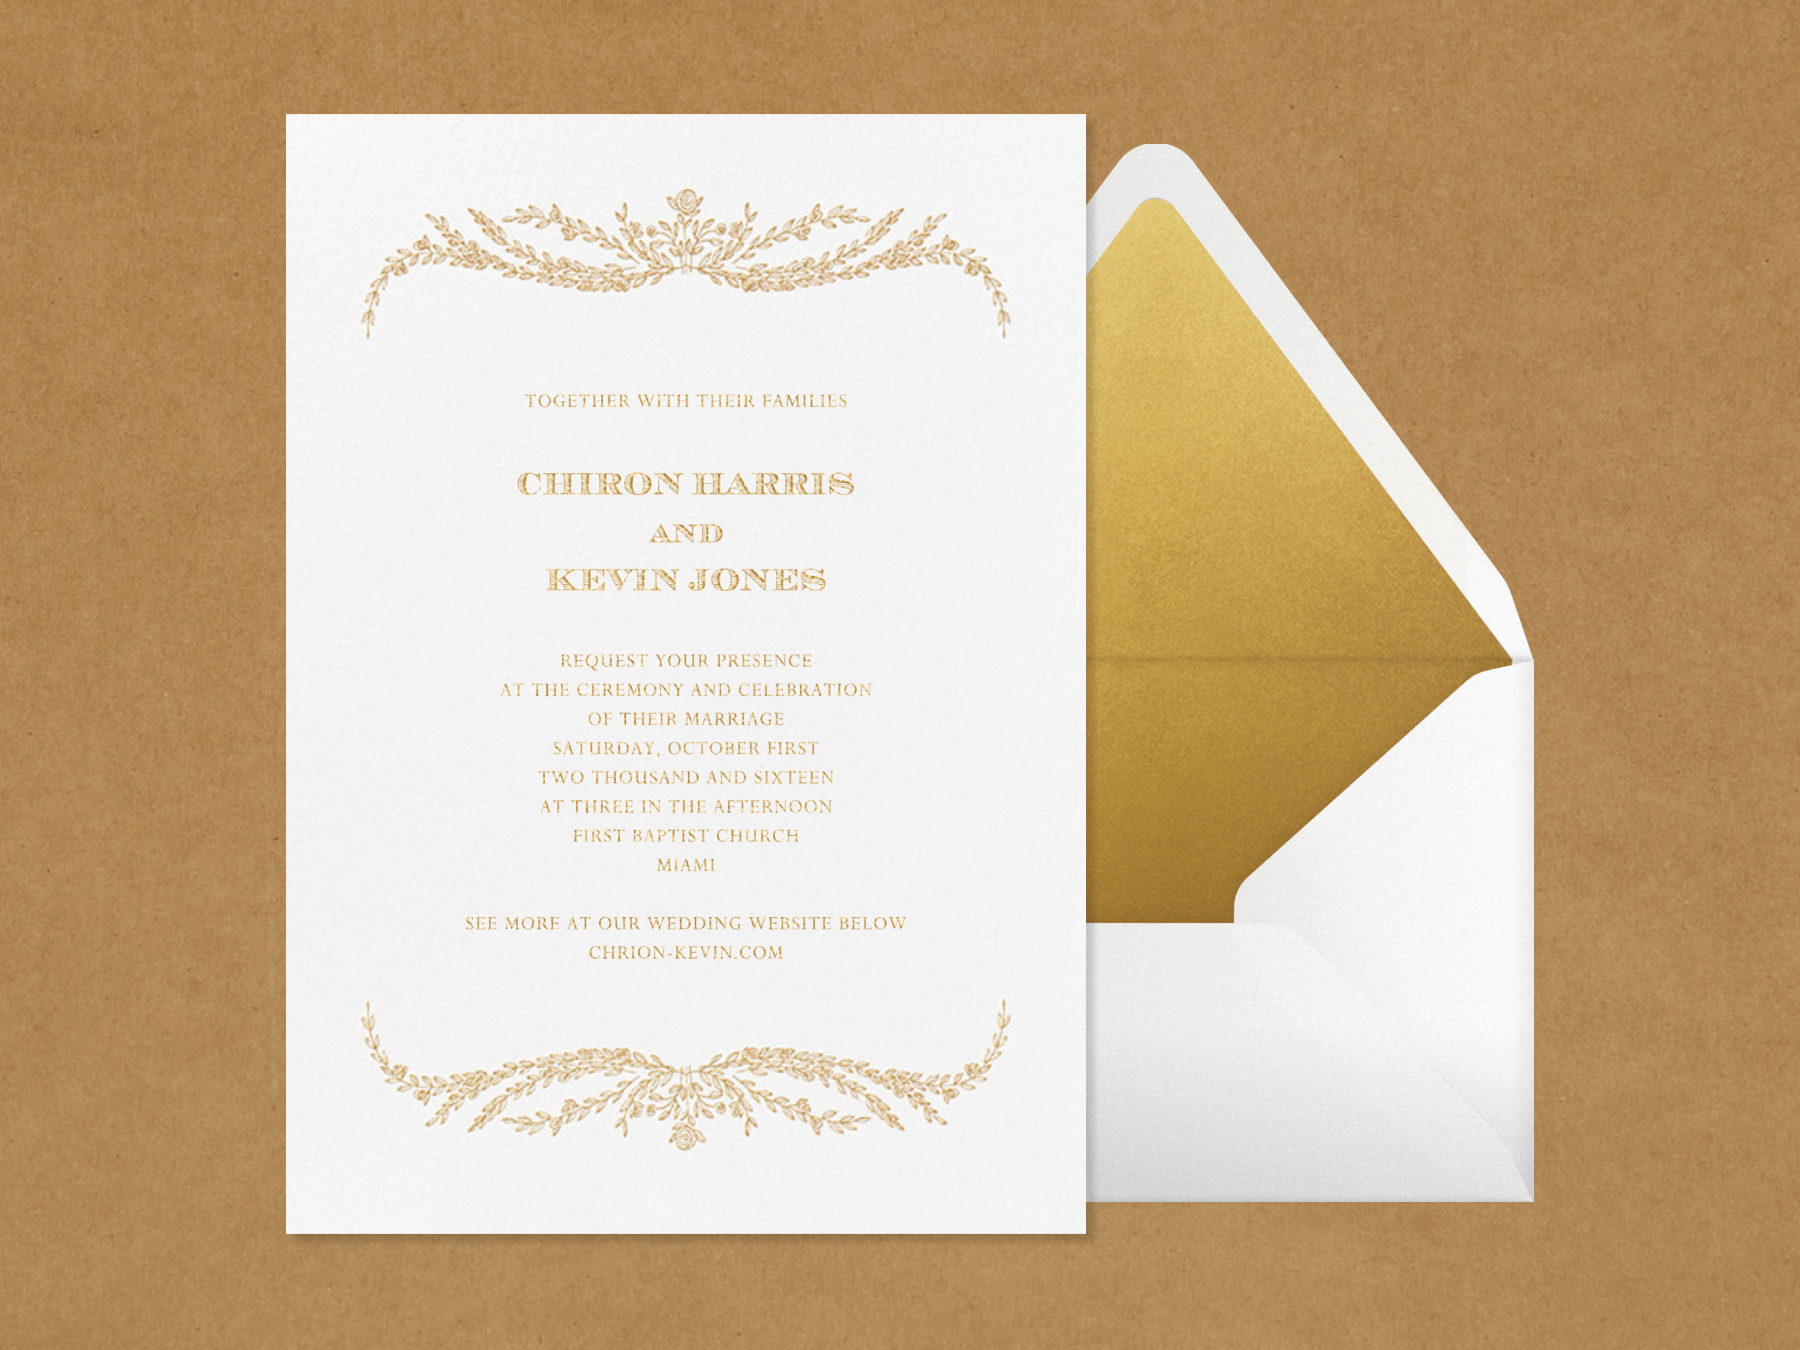 A white wedding invitation with gold leafy flourishes above and below the details next to a white envelope with gold lining on a craft paper background.